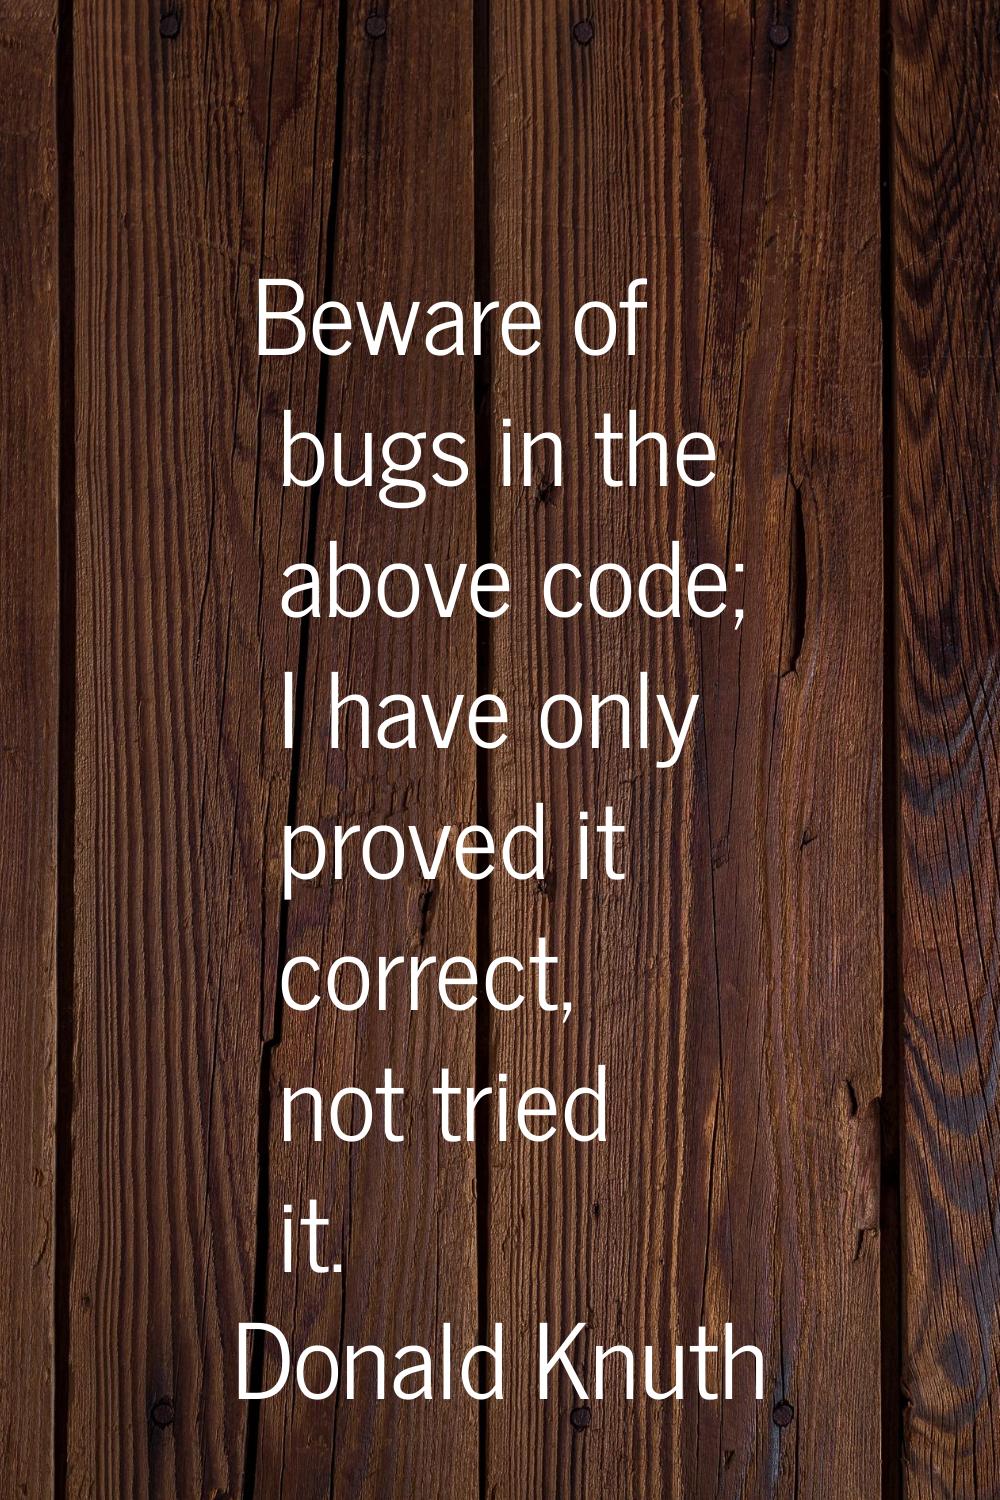 Beware of bugs in the above code; I have only proved it correct, not tried it.